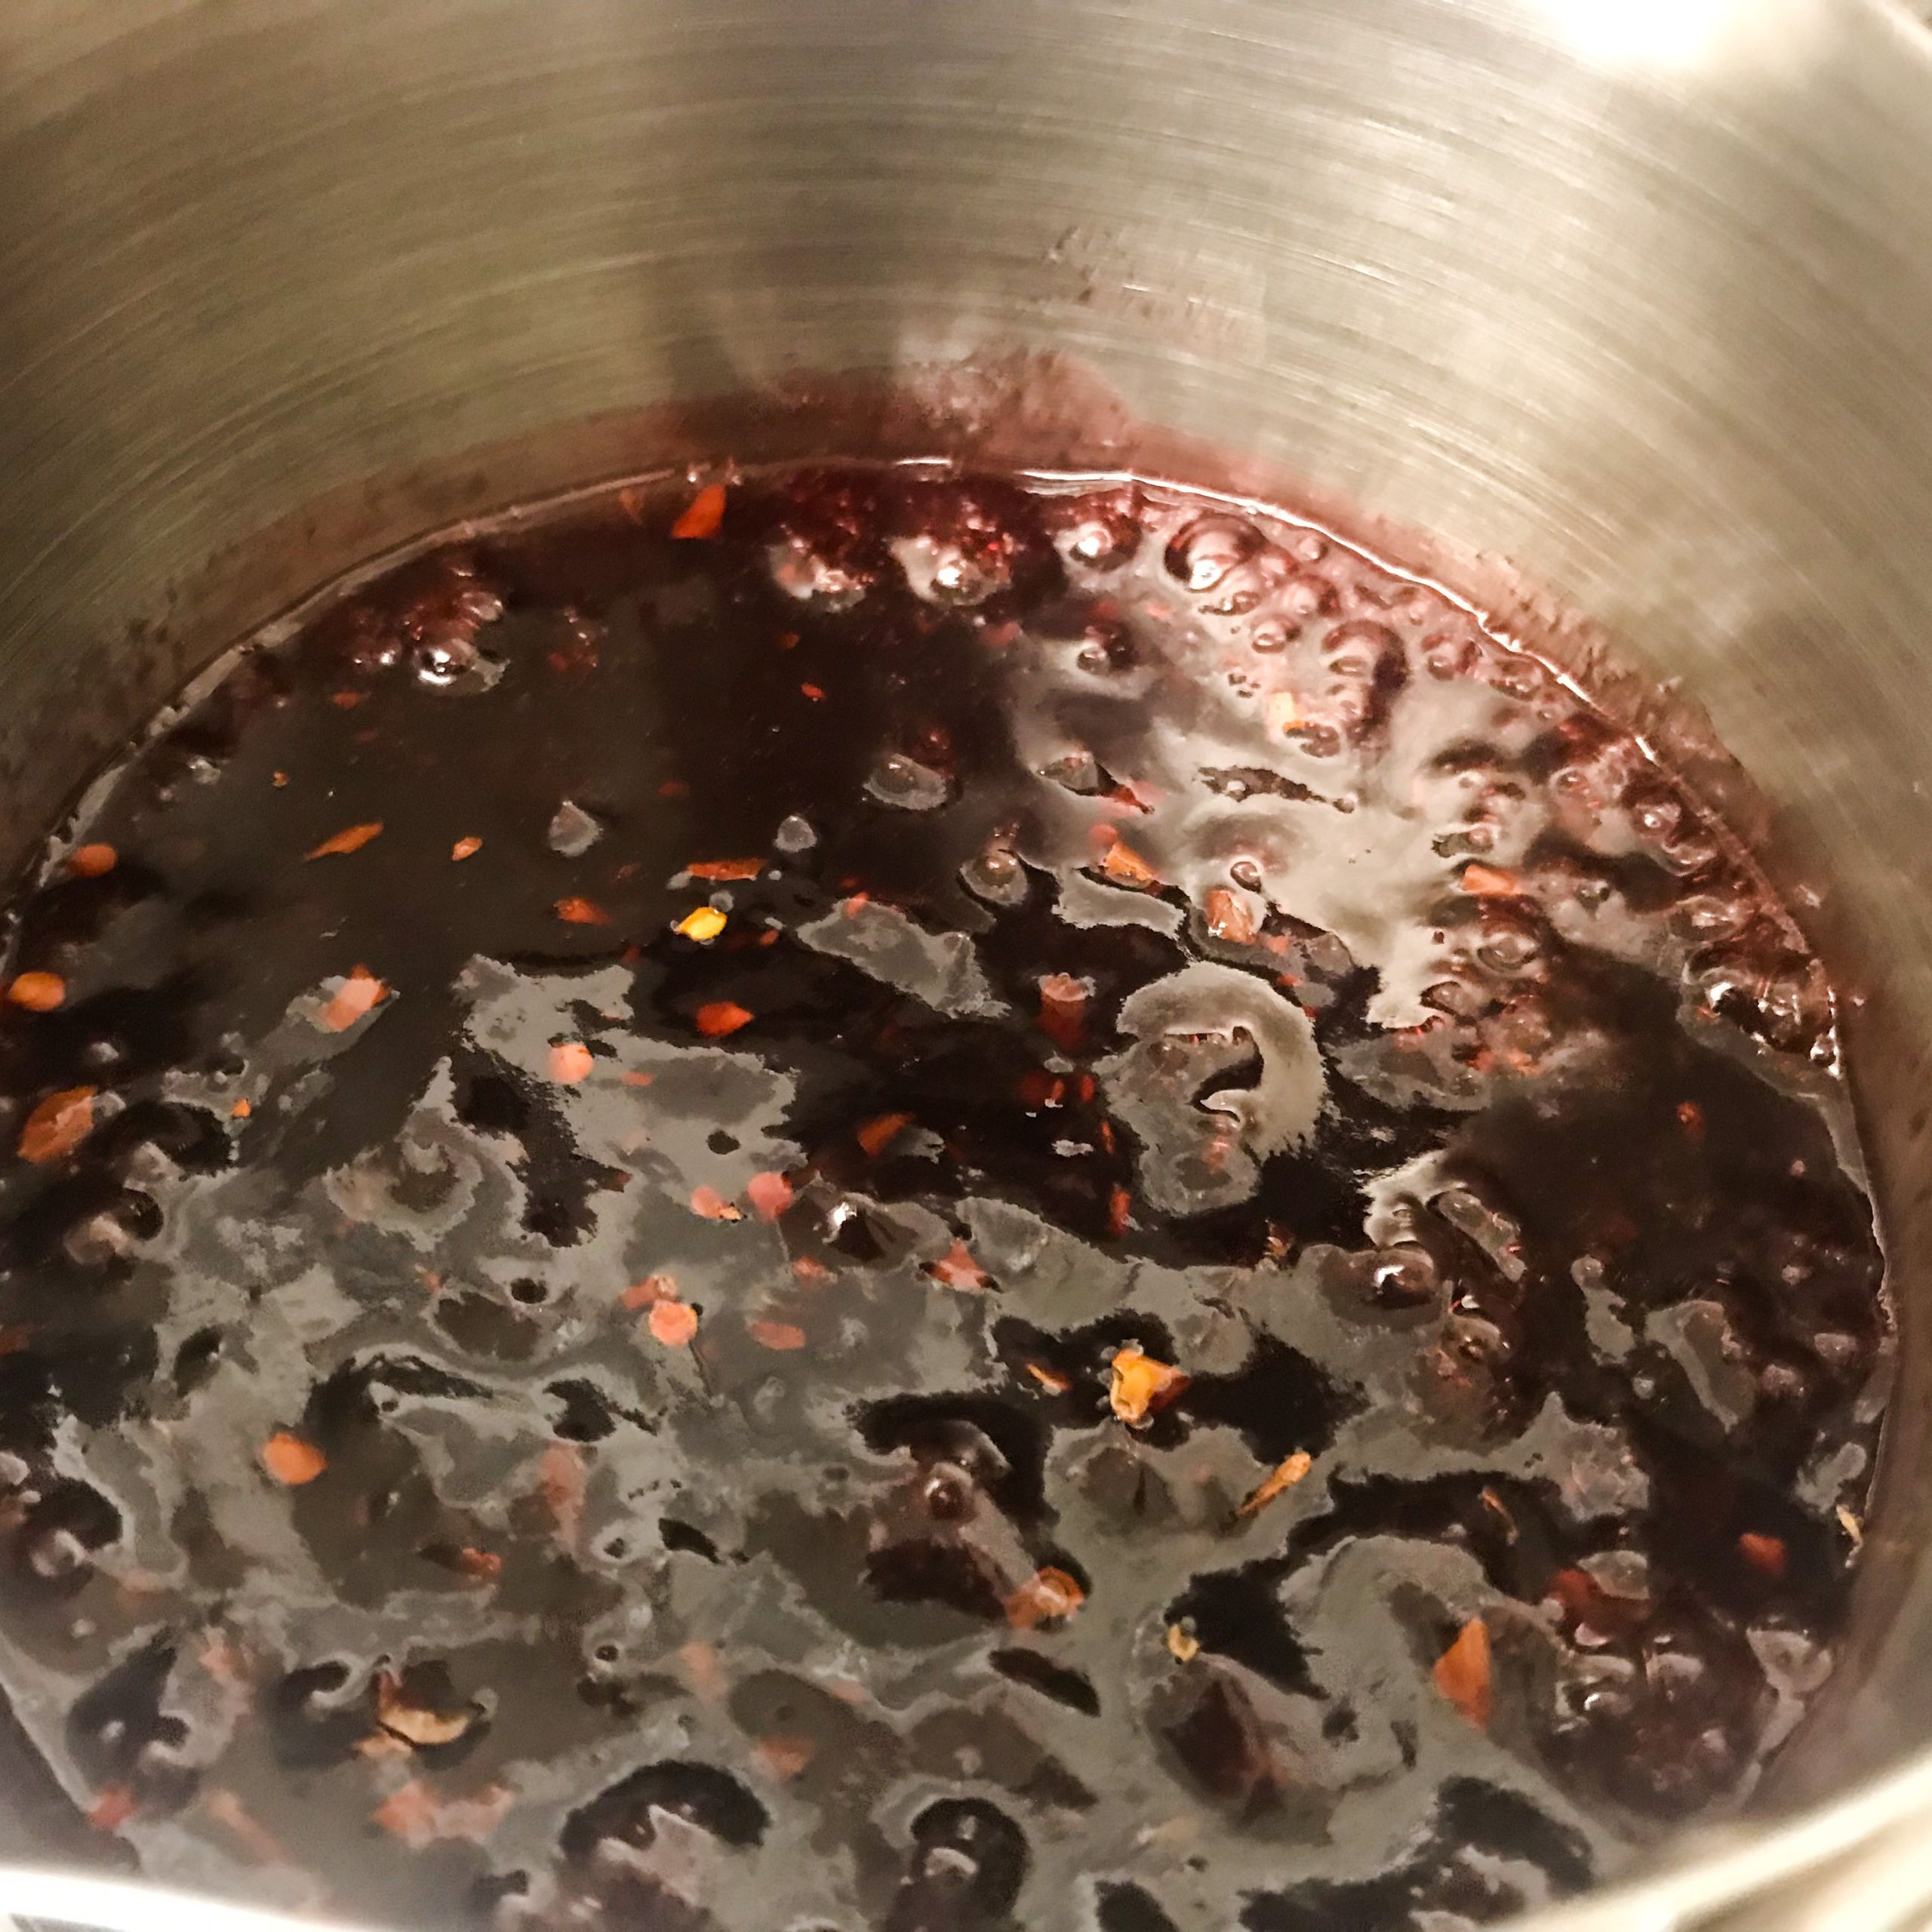 pot of raspberry preserves and chili flakes on the stove